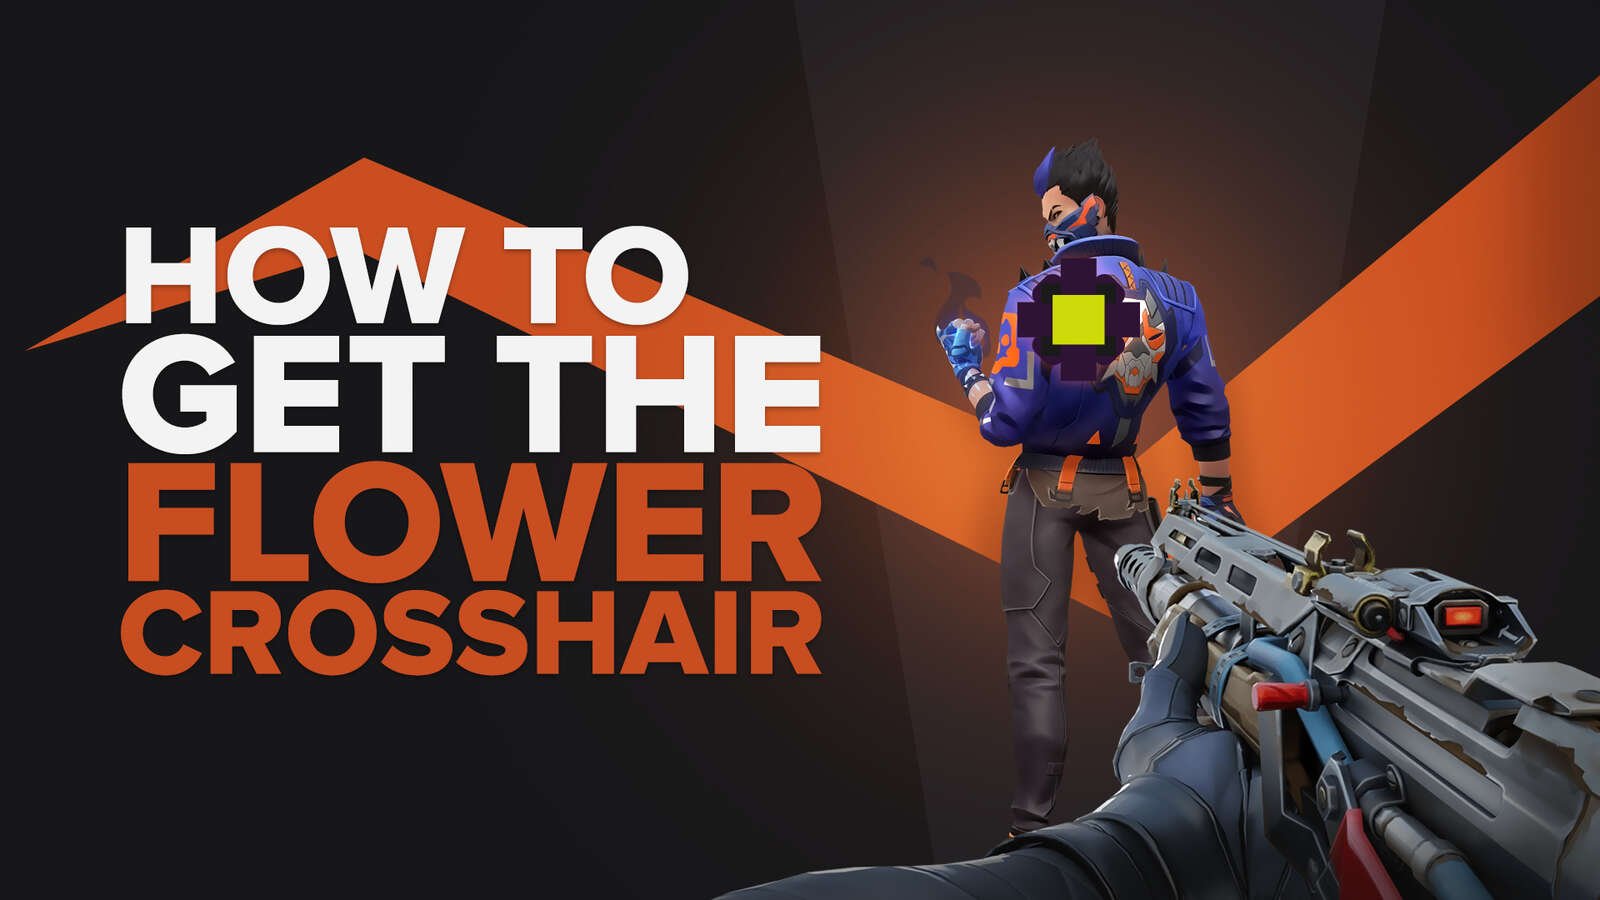 How to get the flower crosshair in Valorant